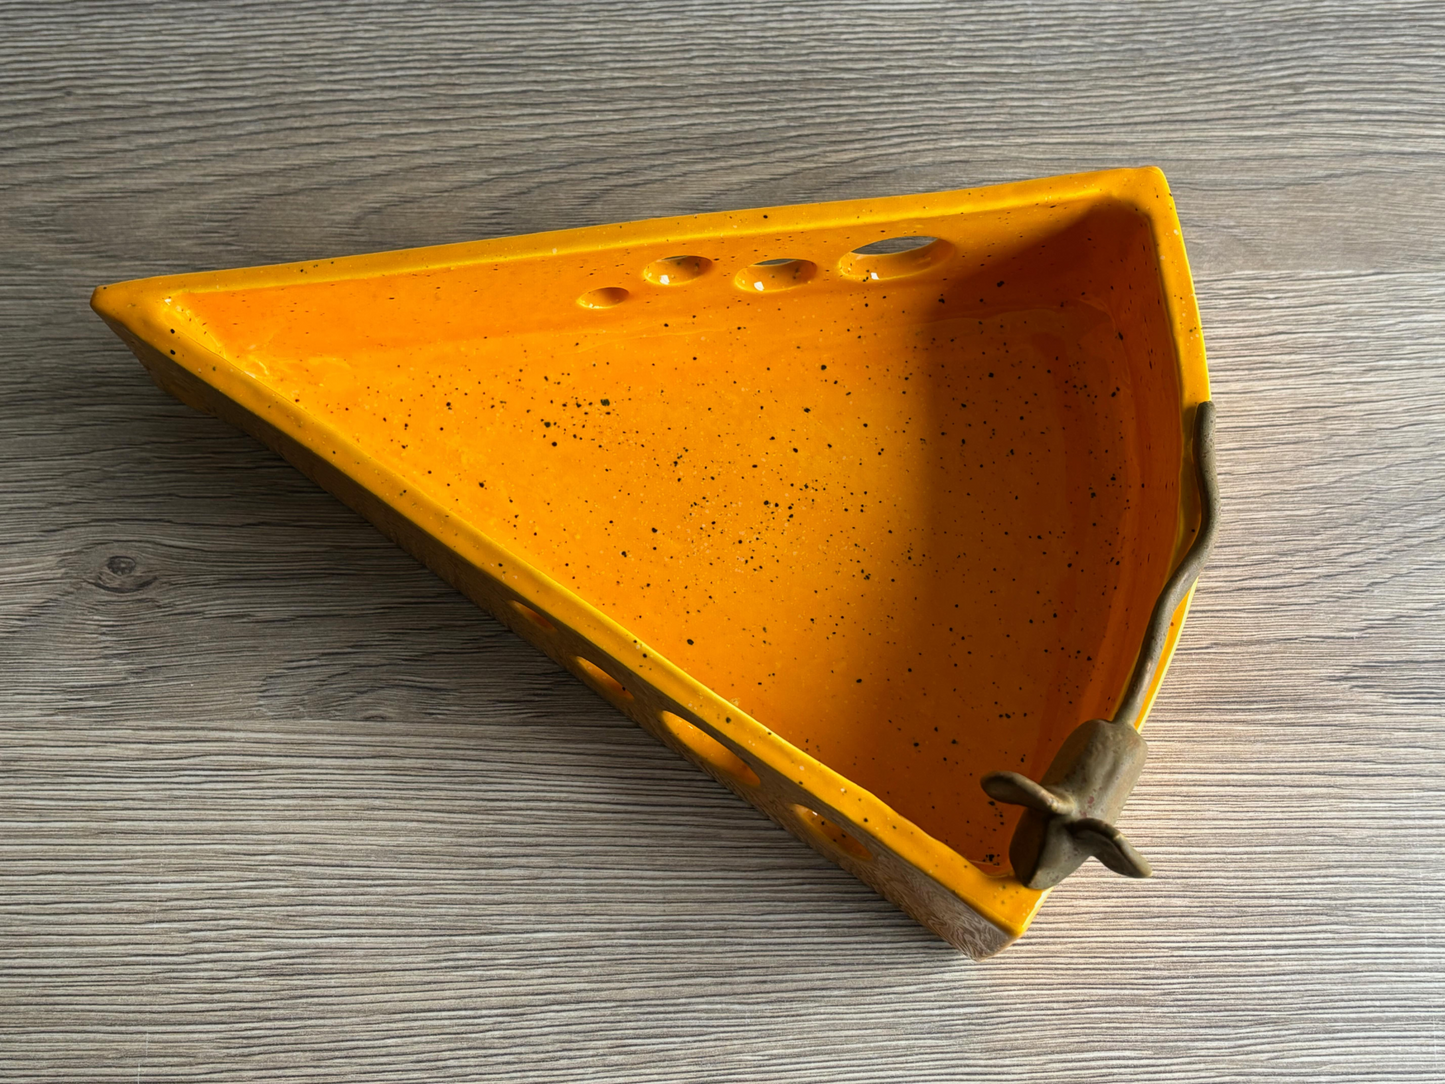 Handmade Cheese and Cracker Dish - Unique Style, Yellow Glaze, 10 Inches x 4 Inches